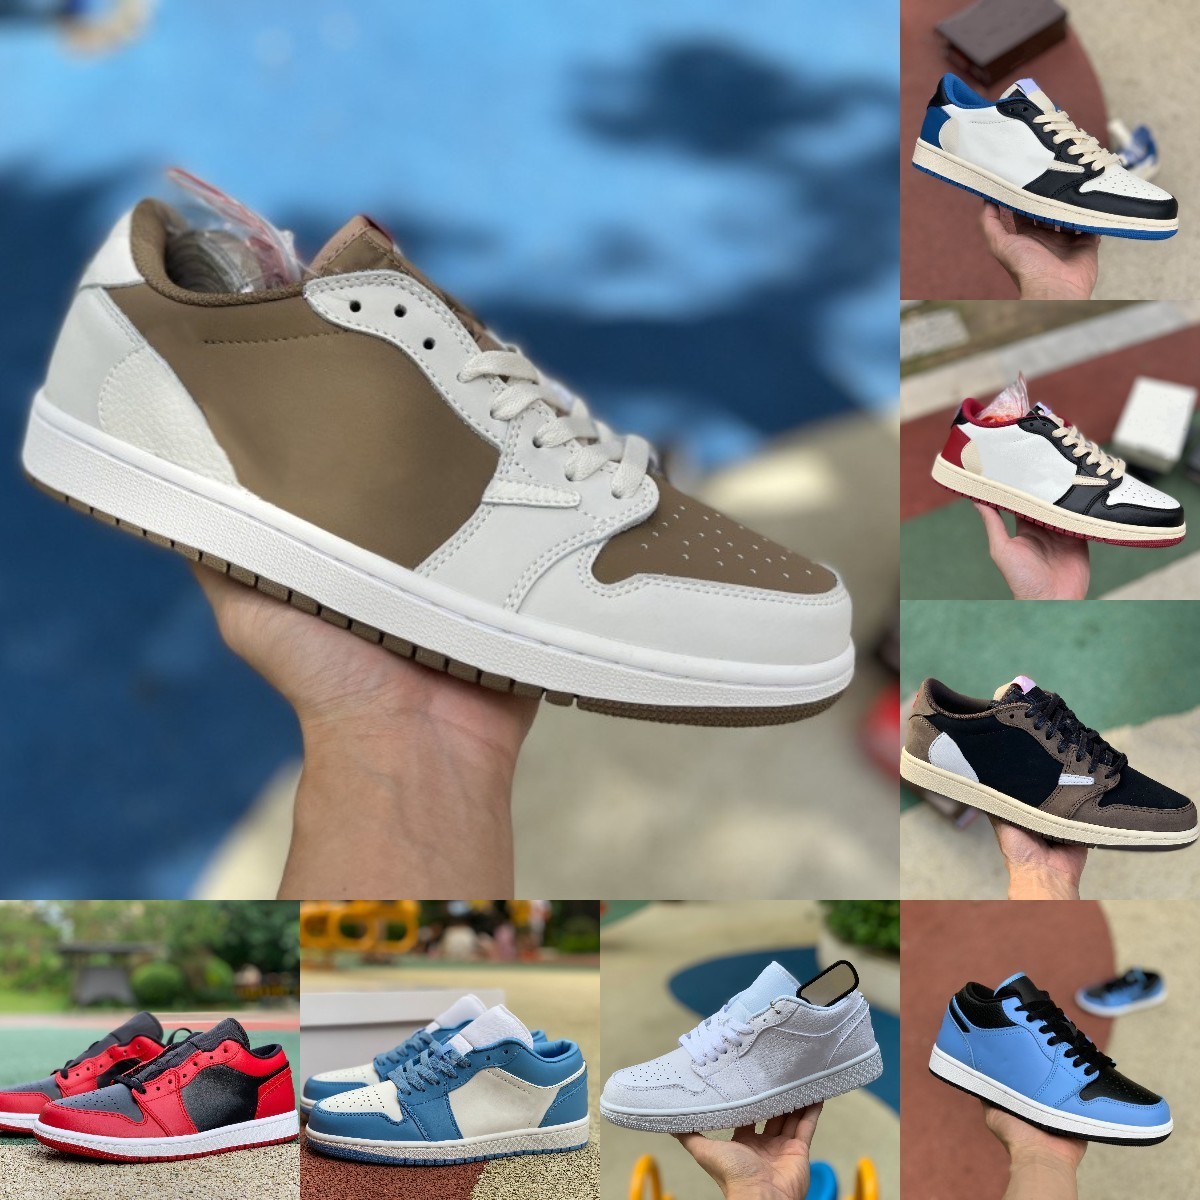 

2022 Fragment TS Jumpman X 1 1S Low Basketball Shoes Starfish White Brown Red Gold Banned UNC Court Purple Black Toe Shadow Panda Emerald Designer Sports Sneakers L08, Please contact us